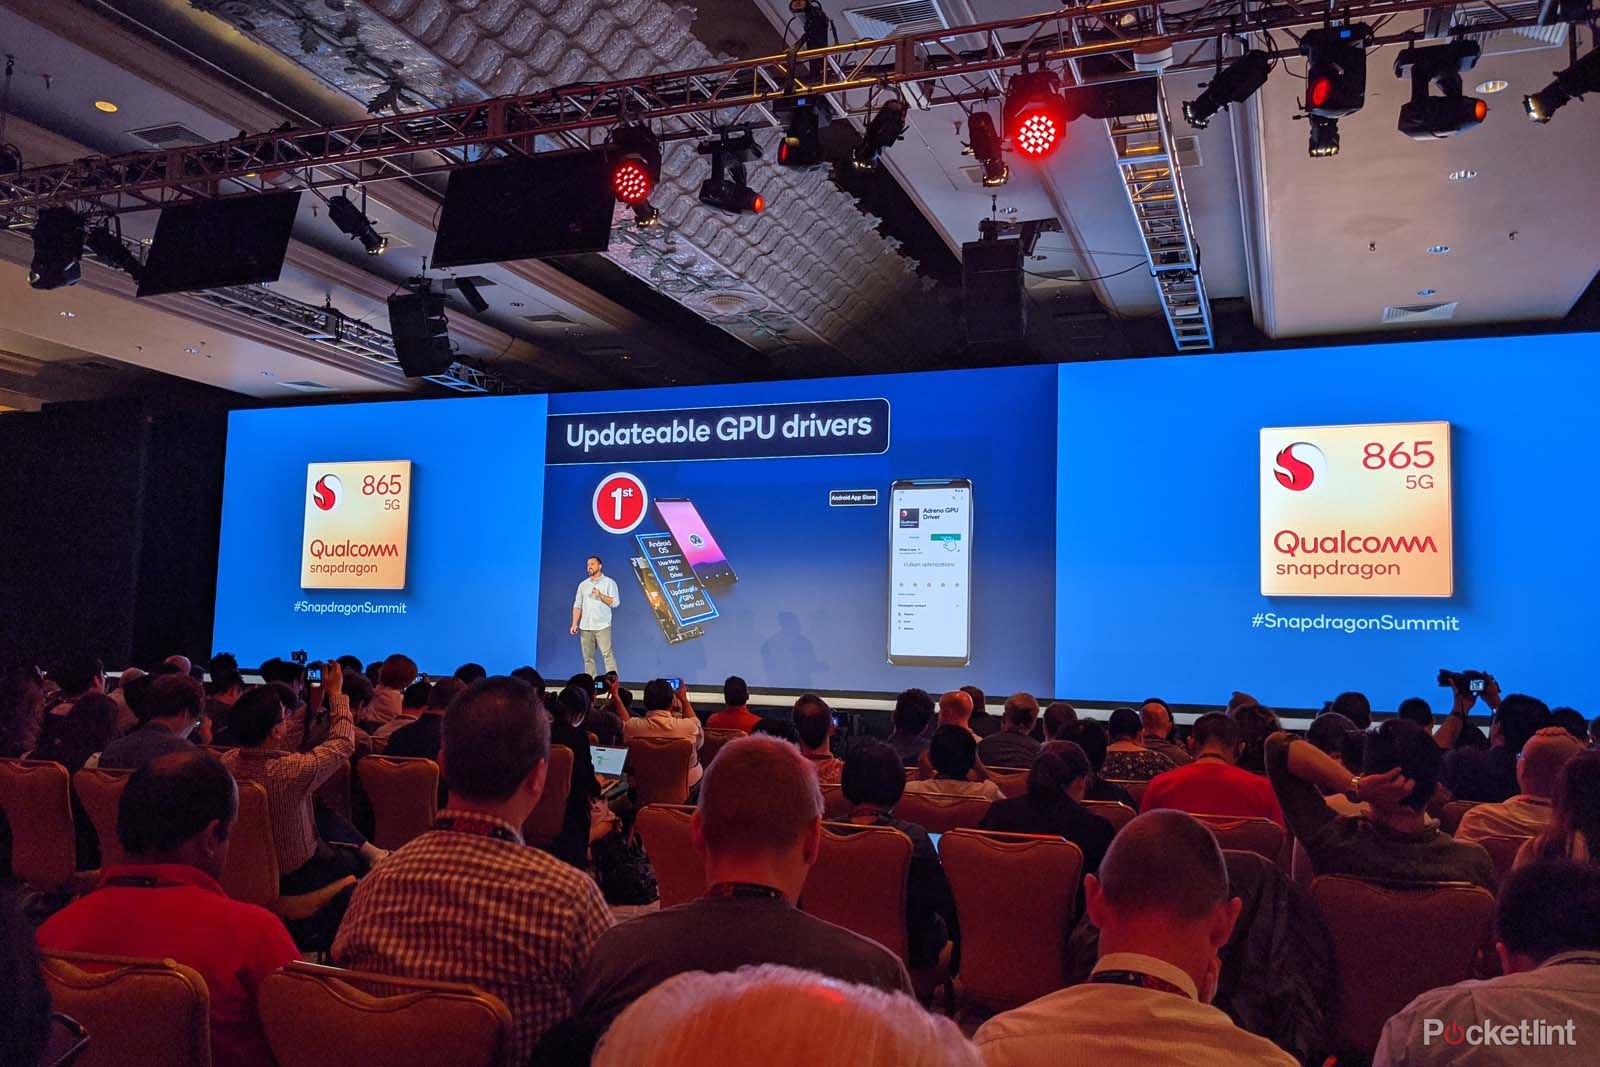 Qualcomm Snapdragon 865 Will Offer Updatable Gpu Drivers To Boost Your Mobile Gaming image 2